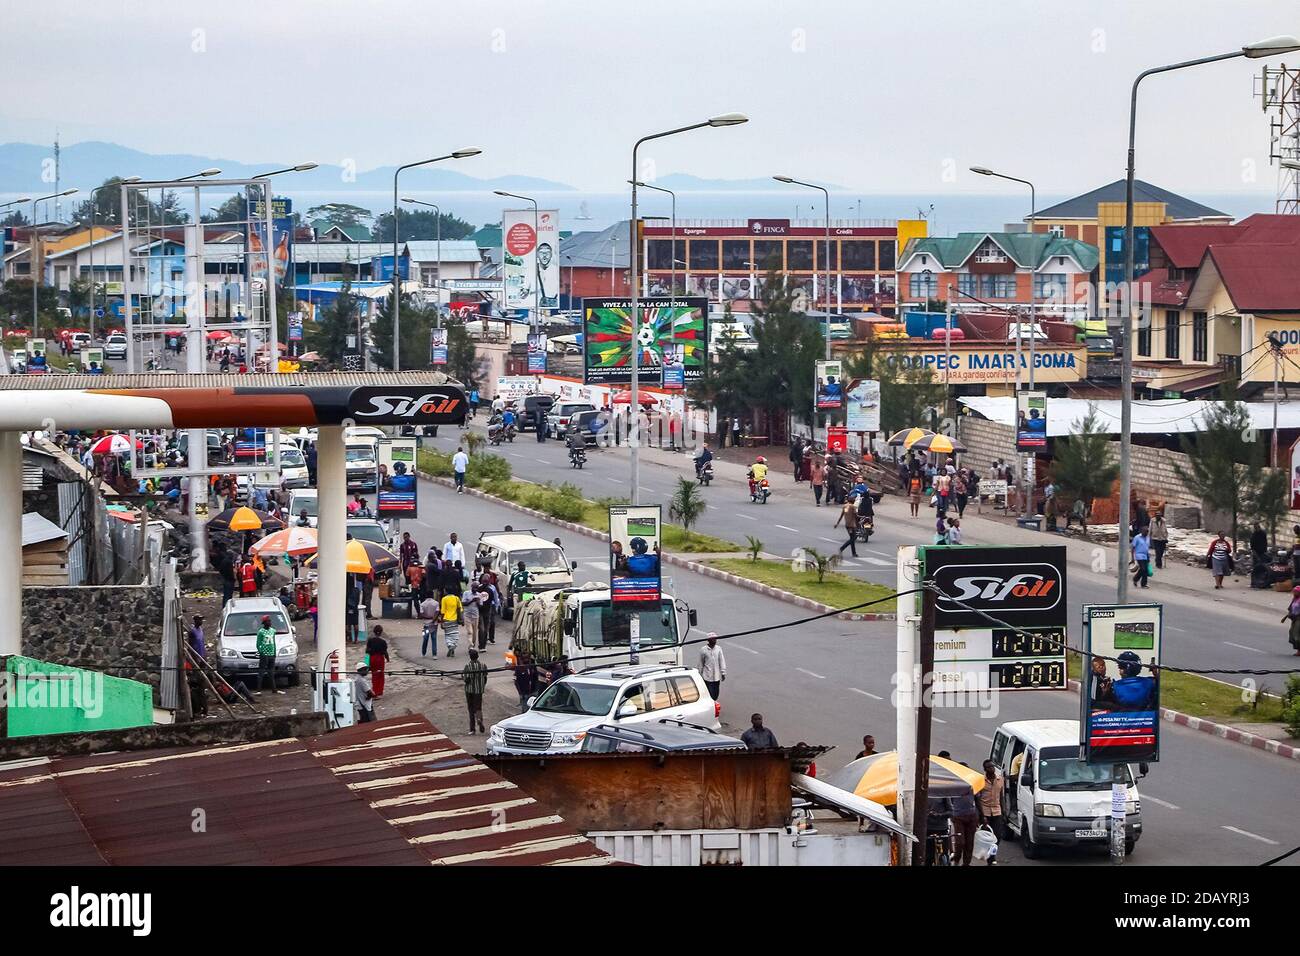 The city center of Goma, Democratic Republic of Congo, includes fuel  stations for gas, shops, markets, traffic and private homes Stock Photo -  Alamy